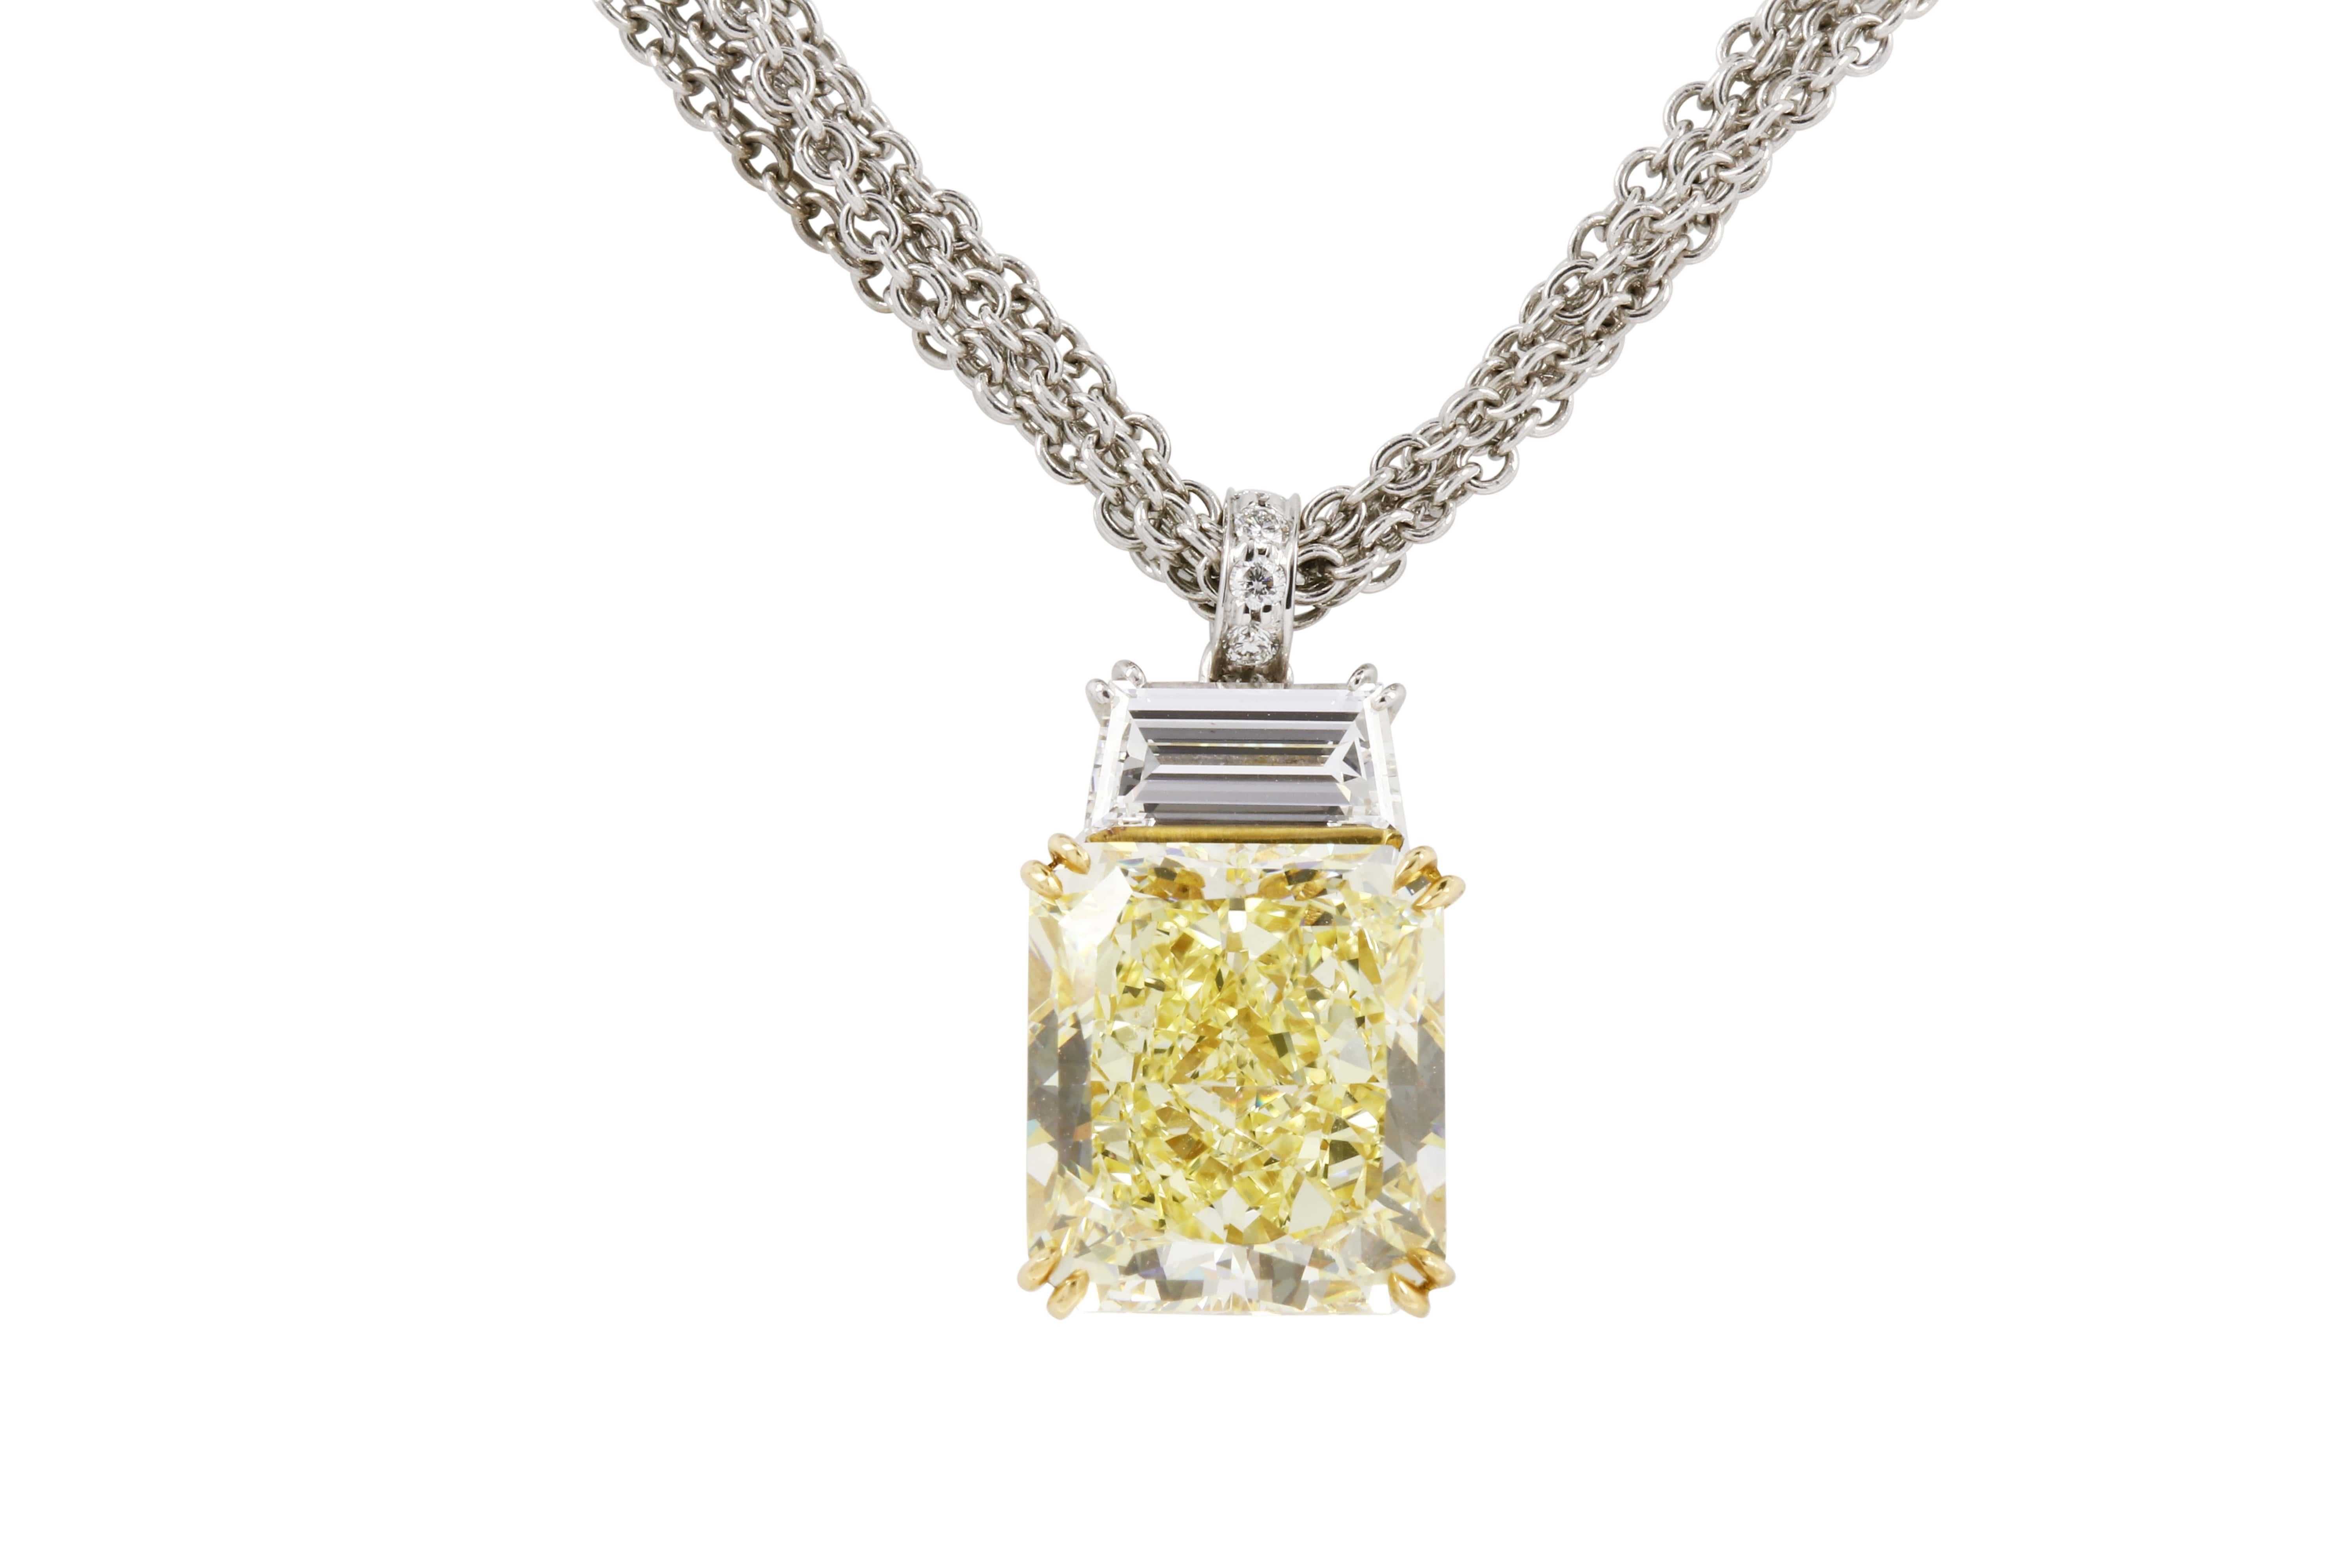 Featuring a rare, radiant-cut natural yellow diamond, weighing 8.32 carats, suspended from a hexagon-shape diamond weighing 0.76 carats. Accompanied by a GIA diamond report stating that the diamond is natural Fancy Yellow Colour, Internally Flawless